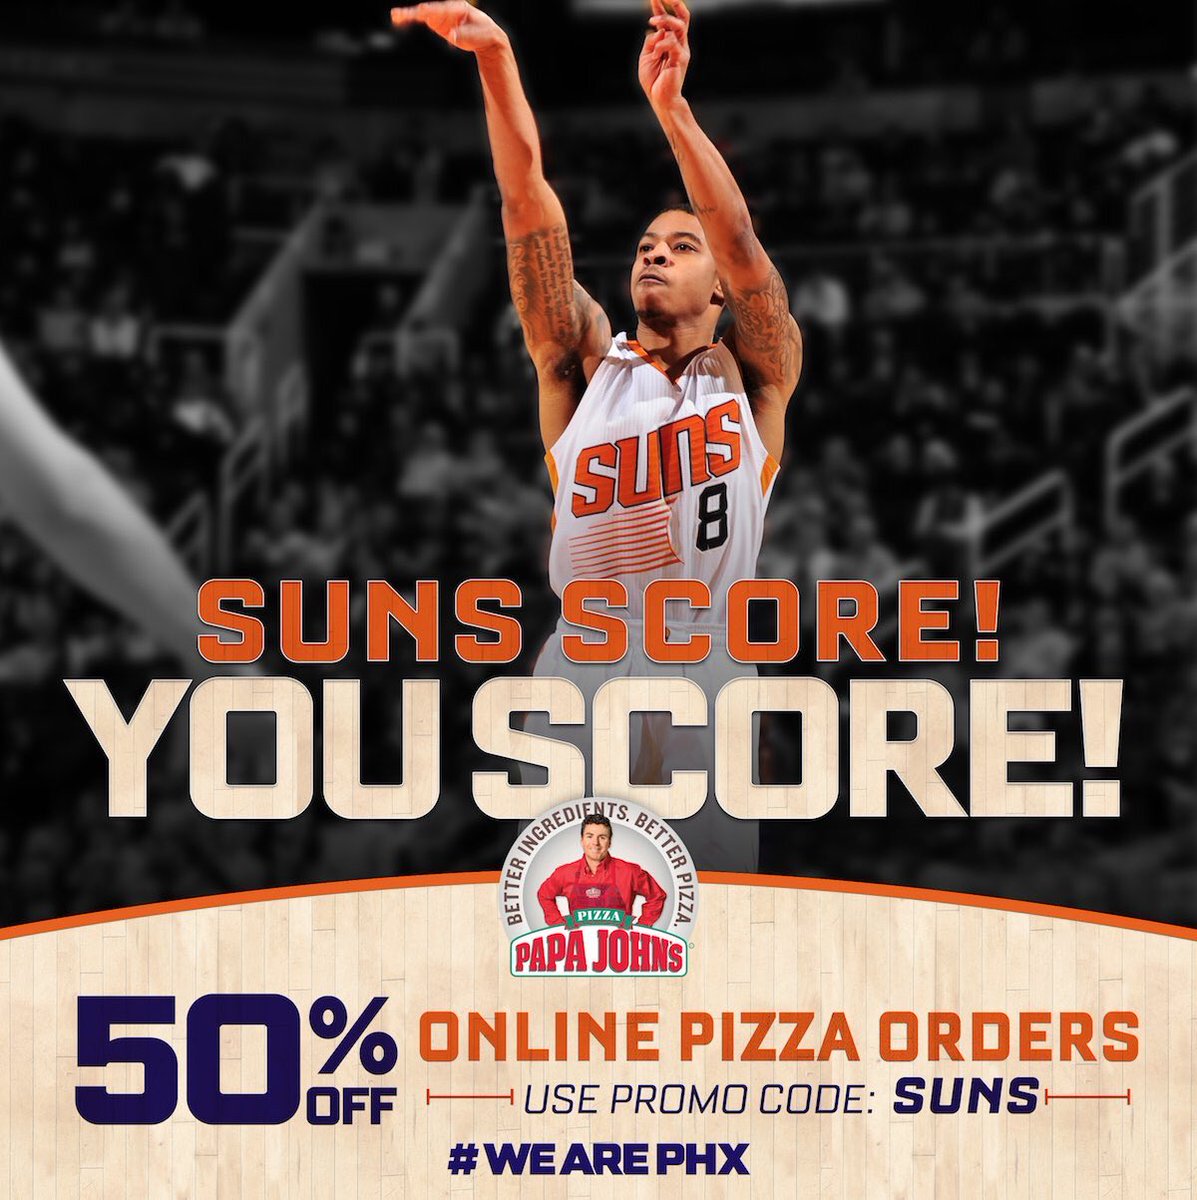 Suns scored 90+ last night earning you 50% off an online pizza order of @PapaJohnsPHX w/ code SUNS https://t.co/o5V9EvVSnH